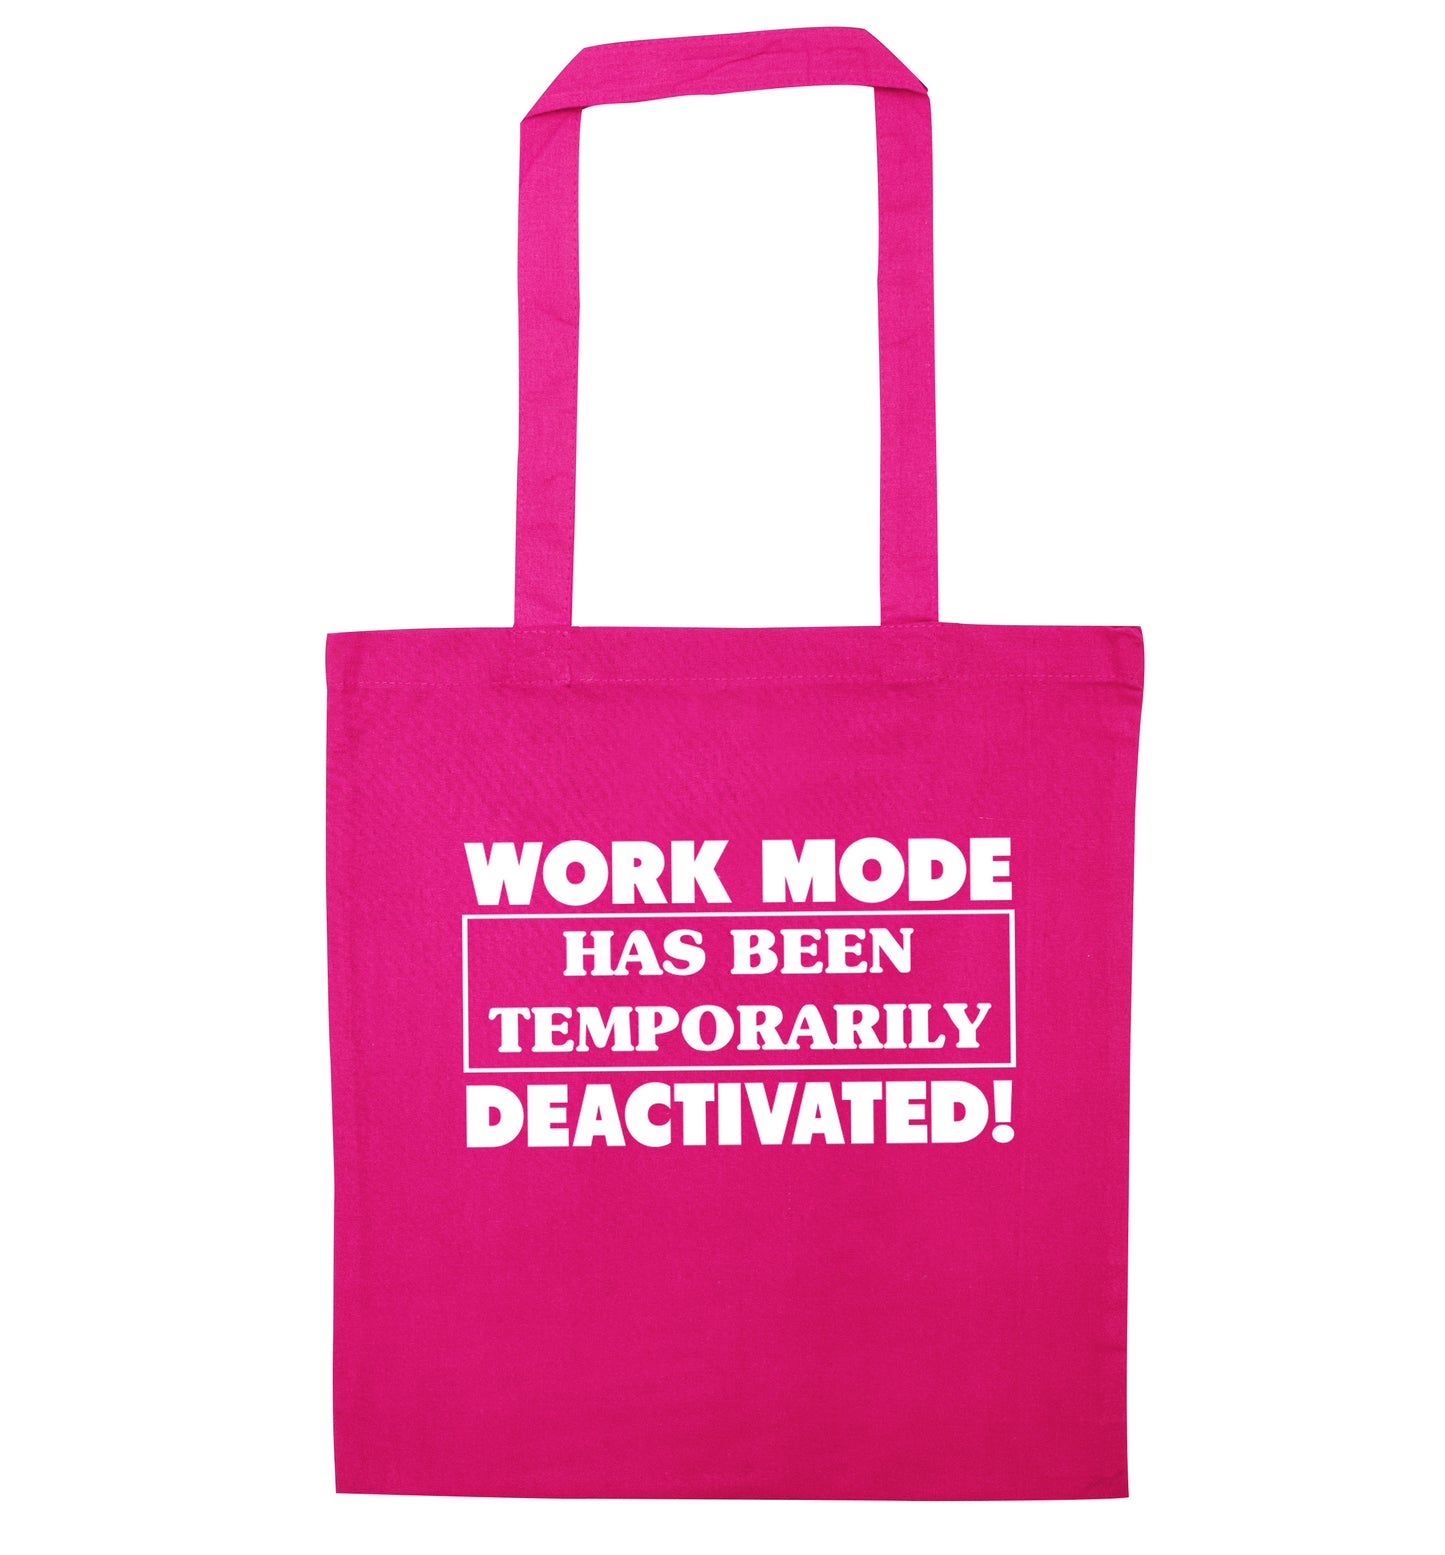 Work mode has now been temporarily deactivated pink tote bag